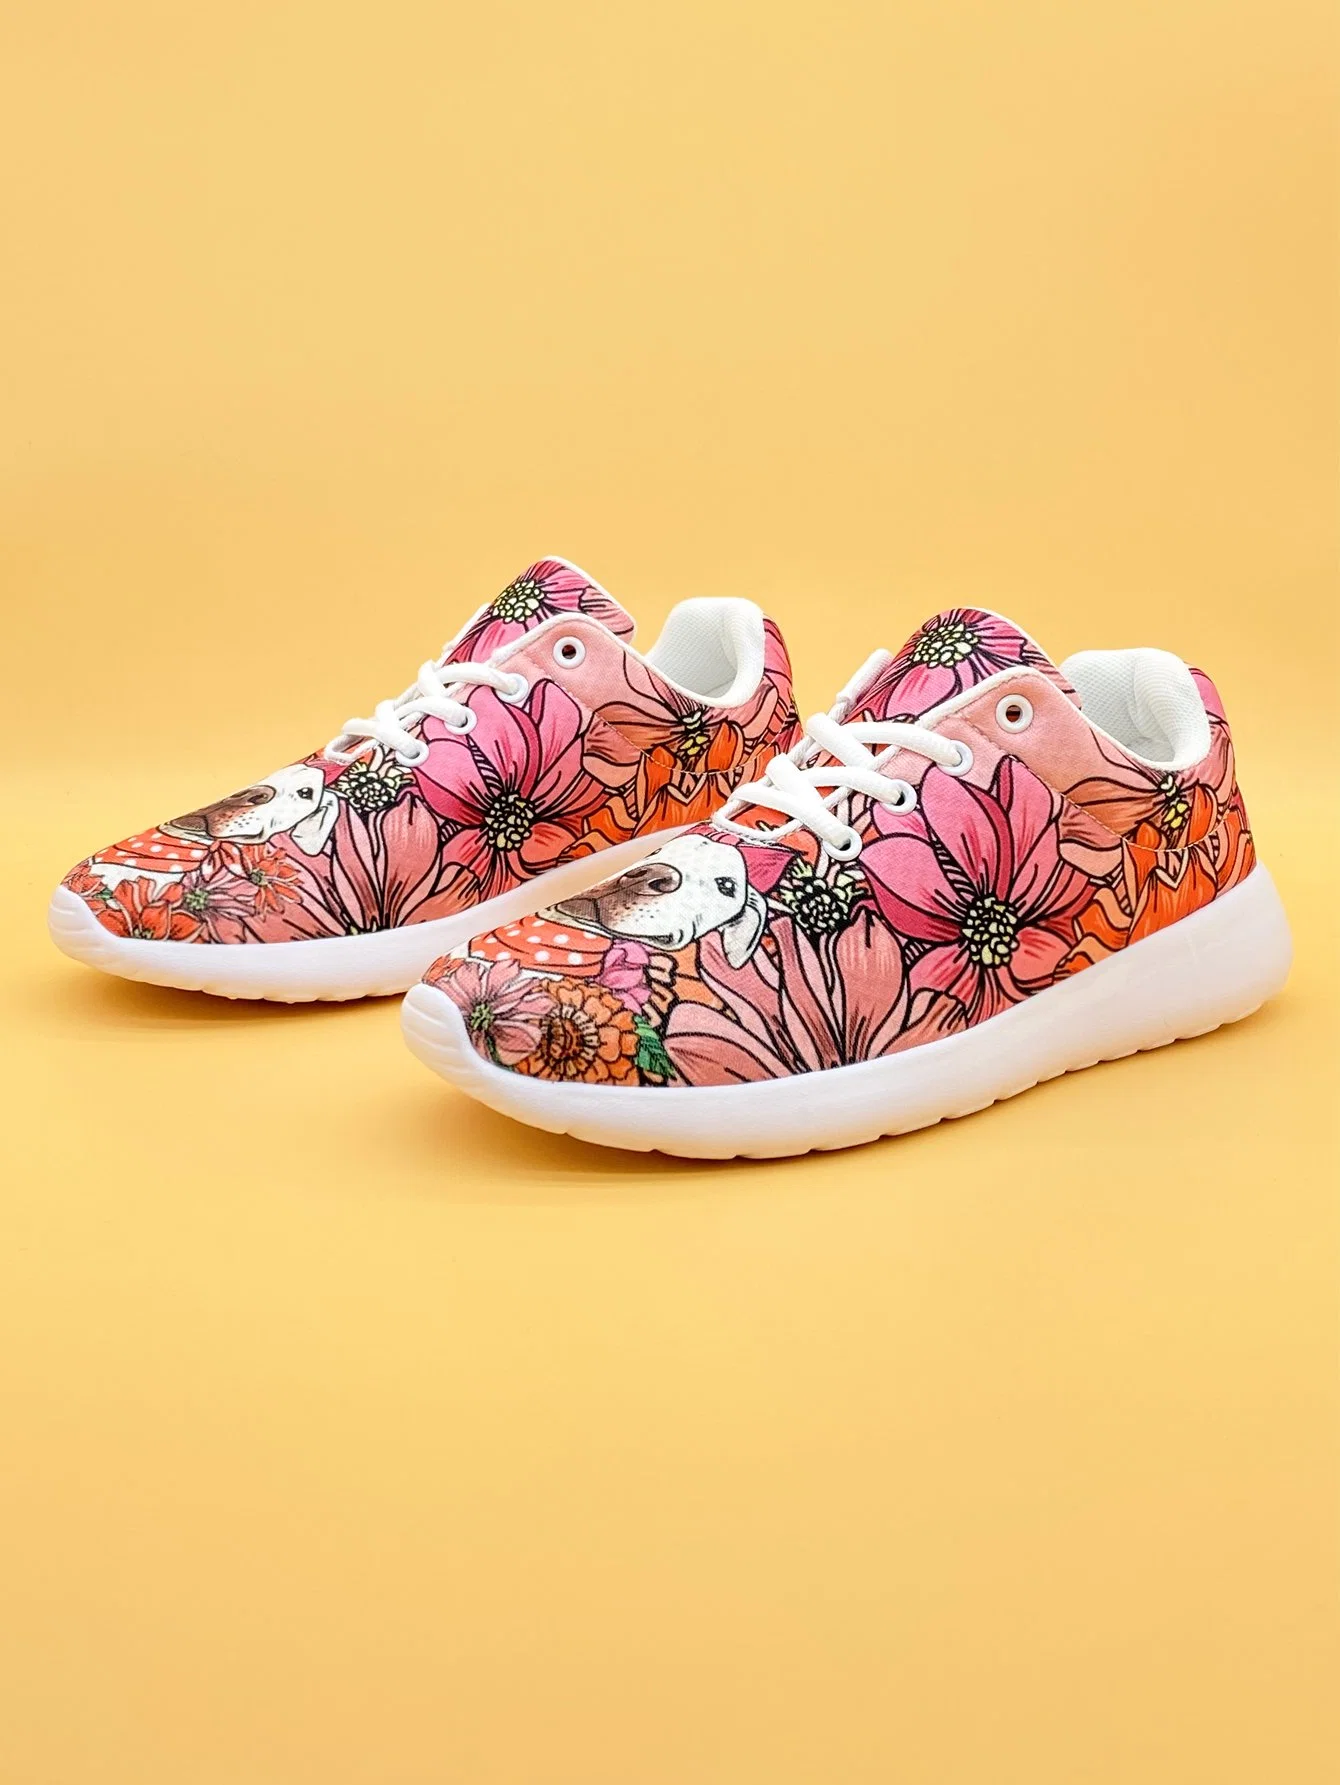 Unisex Custom Shoes Low Top Dog Pattern Casual Shoes, Fabric Running Shoes Outdoor Walking Shoes